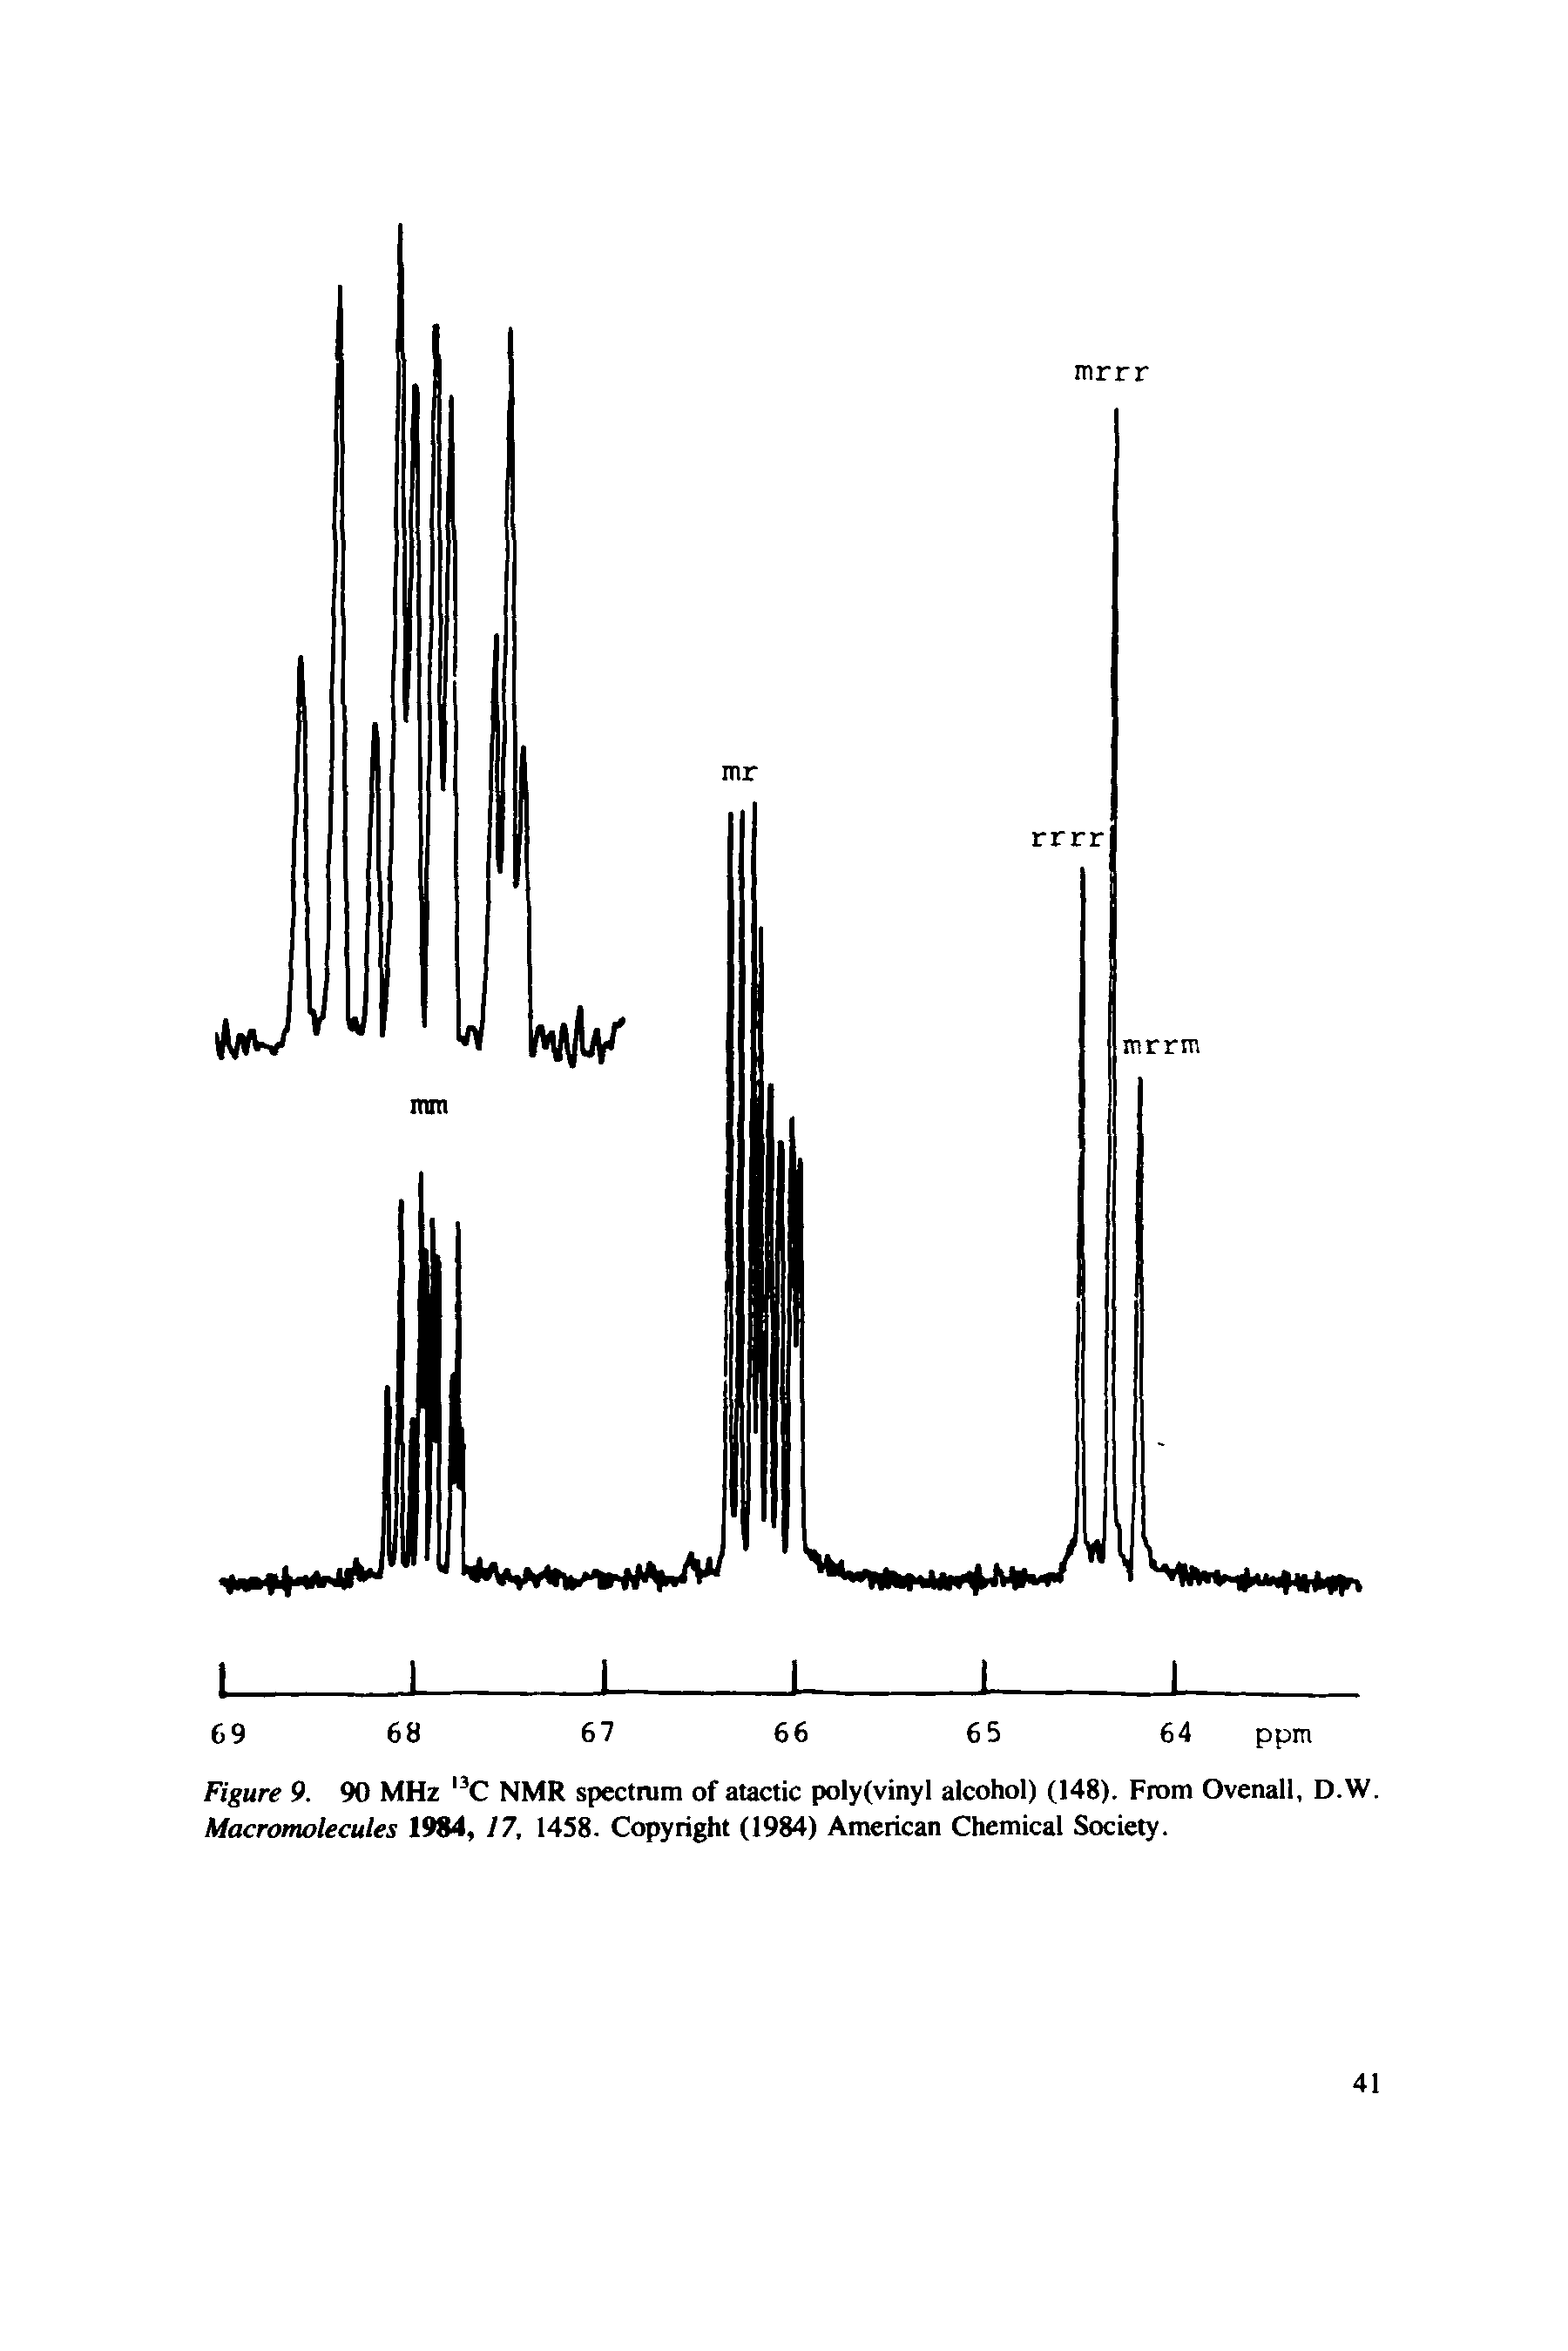 Figure 9. 90 MHz C NMR spectnim of atactic poly(vinyl alcohol) (148). From Ovenall, D.W. Macromolecules 19 4, 17, 1458. Copyright (1984) American Chemical Society.